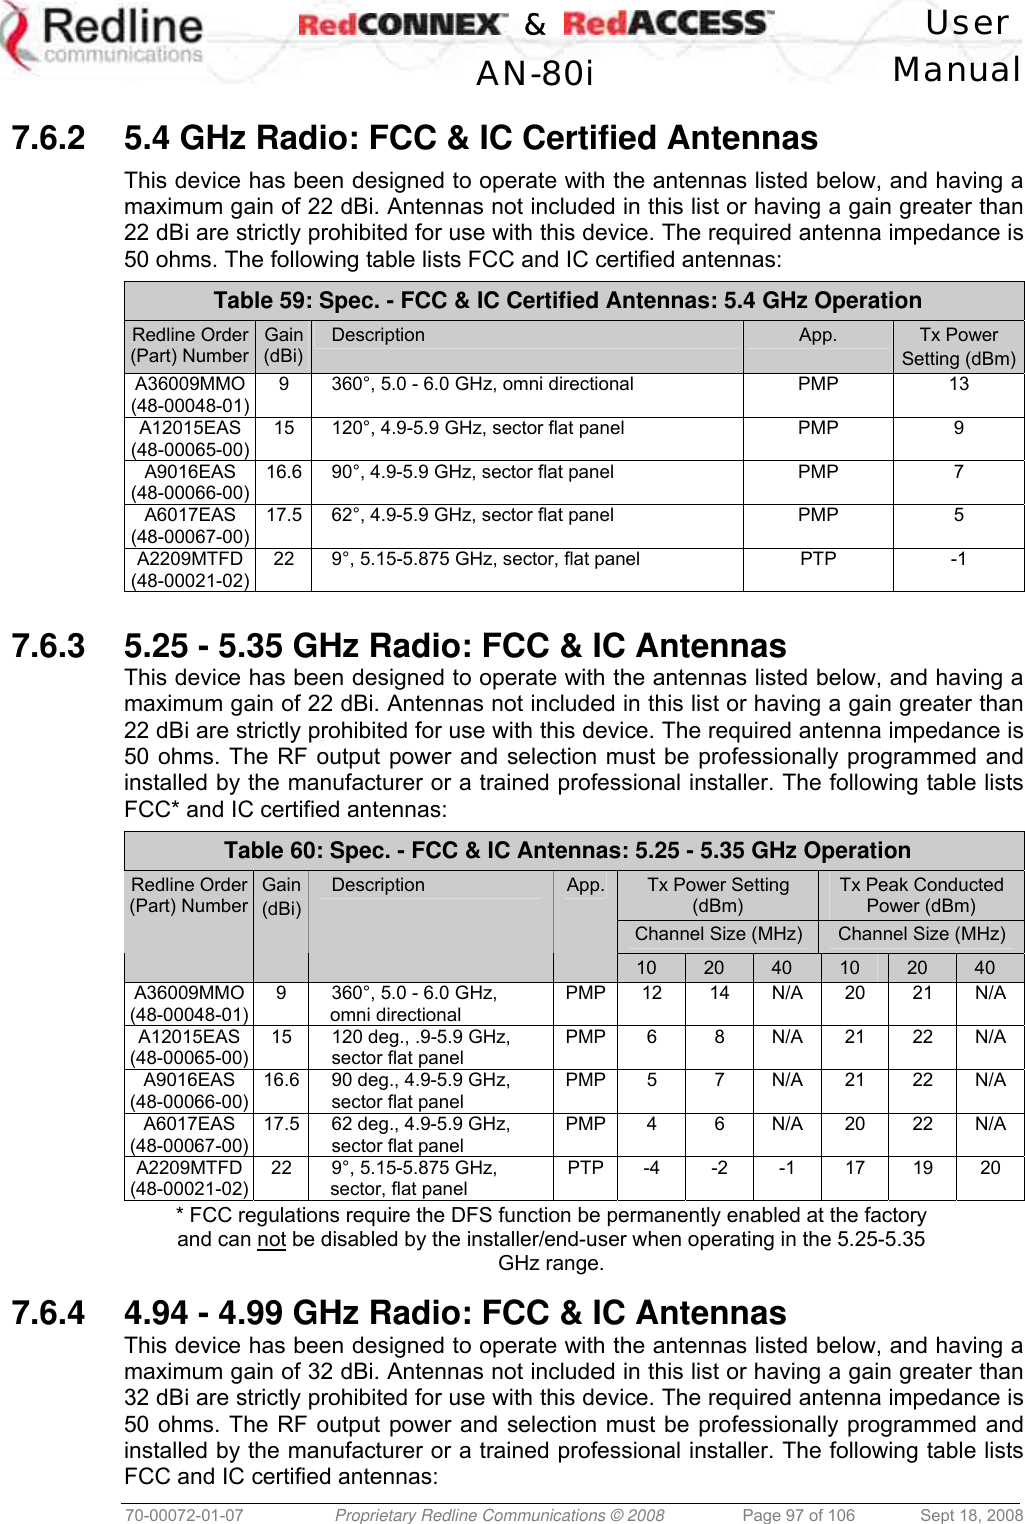    &amp;  User  AN-80i Manual  70-00072-01-07  Proprietary Redline Communications © 2008  Page 97 of 106  Sept 18, 2008  7.6.2  5.4 GHz Radio: FCC &amp; IC Certified Antennas  This device has been designed to operate with the antennas listed below, and having a maximum gain of 22 dBi. Antennas not included in this list or having a gain greater than 22 dBi are strictly prohibited for use with this device. The required antenna impedance is 50 ohms. The following table lists FCC and IC certified antennas: Table 59: Spec. - FCC &amp; IC Certified Antennas: 5.4 GHz Operation Redline Order (Part) Number Gain (dBi) Description  App.  Tx Power Setting (dBm)A36009MMO (48-00048-01) 9  360°, 5.0 - 6.0 GHz, omni directional  PMP  13 A12015EAS  (48-00065-00) 15  120°, 4.9-5.9 GHz, sector flat panel  PMP  9 A9016EAS (48-00066-00) 16.6  90°, 4.9-5.9 GHz, sector flat panel  PMP  7 A6017EAS (48-00067-00) 17.5  62°, 4.9-5.9 GHz, sector flat panel  PMP  5 A2209MTFD (48-00021-02) 22  9°, 5.15-5.875 GHz, sector, flat panel  PTP  -1  7.6.3  5.25 - 5.35 GHz Radio: FCC &amp; IC Antennas This device has been designed to operate with the antennas listed below, and having a maximum gain of 22 dBi. Antennas not included in this list or having a gain greater than 22 dBi are strictly prohibited for use with this device. The required antenna impedance is 50 ohms. The RF output power and selection must be professionally programmed and installed by the manufacturer or a trained professional installer. The following table lists FCC* and IC certified antennas: Table 60: Spec. - FCC &amp; IC Antennas: 5.25 - 5.35 GHz Operation Tx Power Setting (dBm) Tx Peak Conducted Power (dBm) Channel Size (MHz)  Channel Size (MHz) Redline Order (Part) Number Gain (dBi) Description  App. 10  20  40  10  20  40 A36009MMO (48-00048-01) 9  360°, 5.0 - 6.0 GHz, omni directional PMP 12  14 N/A 20  21 N/A A12015EAS  (48-00065-00) 15  120 deg., .9-5.9 GHz, sector flat panel PMP 6  8  N/A 21  22 N/A A9016EAS (48-00066-00) 16.6  90 deg., 4.9-5.9 GHz, sector flat panel PMP 5  7  N/A 21  22 N/A A6017EAS (48-00067-00) 17.5  62 deg., 4.9-5.9 GHz, sector flat panel PMP 4  6  N/A 20  22 N/A A2209MTFD (48-00021-02) 22 9°, 5.15-5.875 GHz, sector, flat panel PTP -4 -2 -1 17 19 20 * FCC regulations require the DFS function be permanently enabled at the factory and can not be disabled by the installer/end-user when operating in the 5.25-5.35 GHz range.  7.6.4  4.94 - 4.99 GHz Radio: FCC &amp; IC Antennas This device has been designed to operate with the antennas listed below, and having a maximum gain of 32 dBi. Antennas not included in this list or having a gain greater than 32 dBi are strictly prohibited for use with this device. The required antenna impedance is 50 ohms. The RF output power and selection must be professionally programmed and installed by the manufacturer or a trained professional installer. The following table lists FCC and IC certified antennas: 